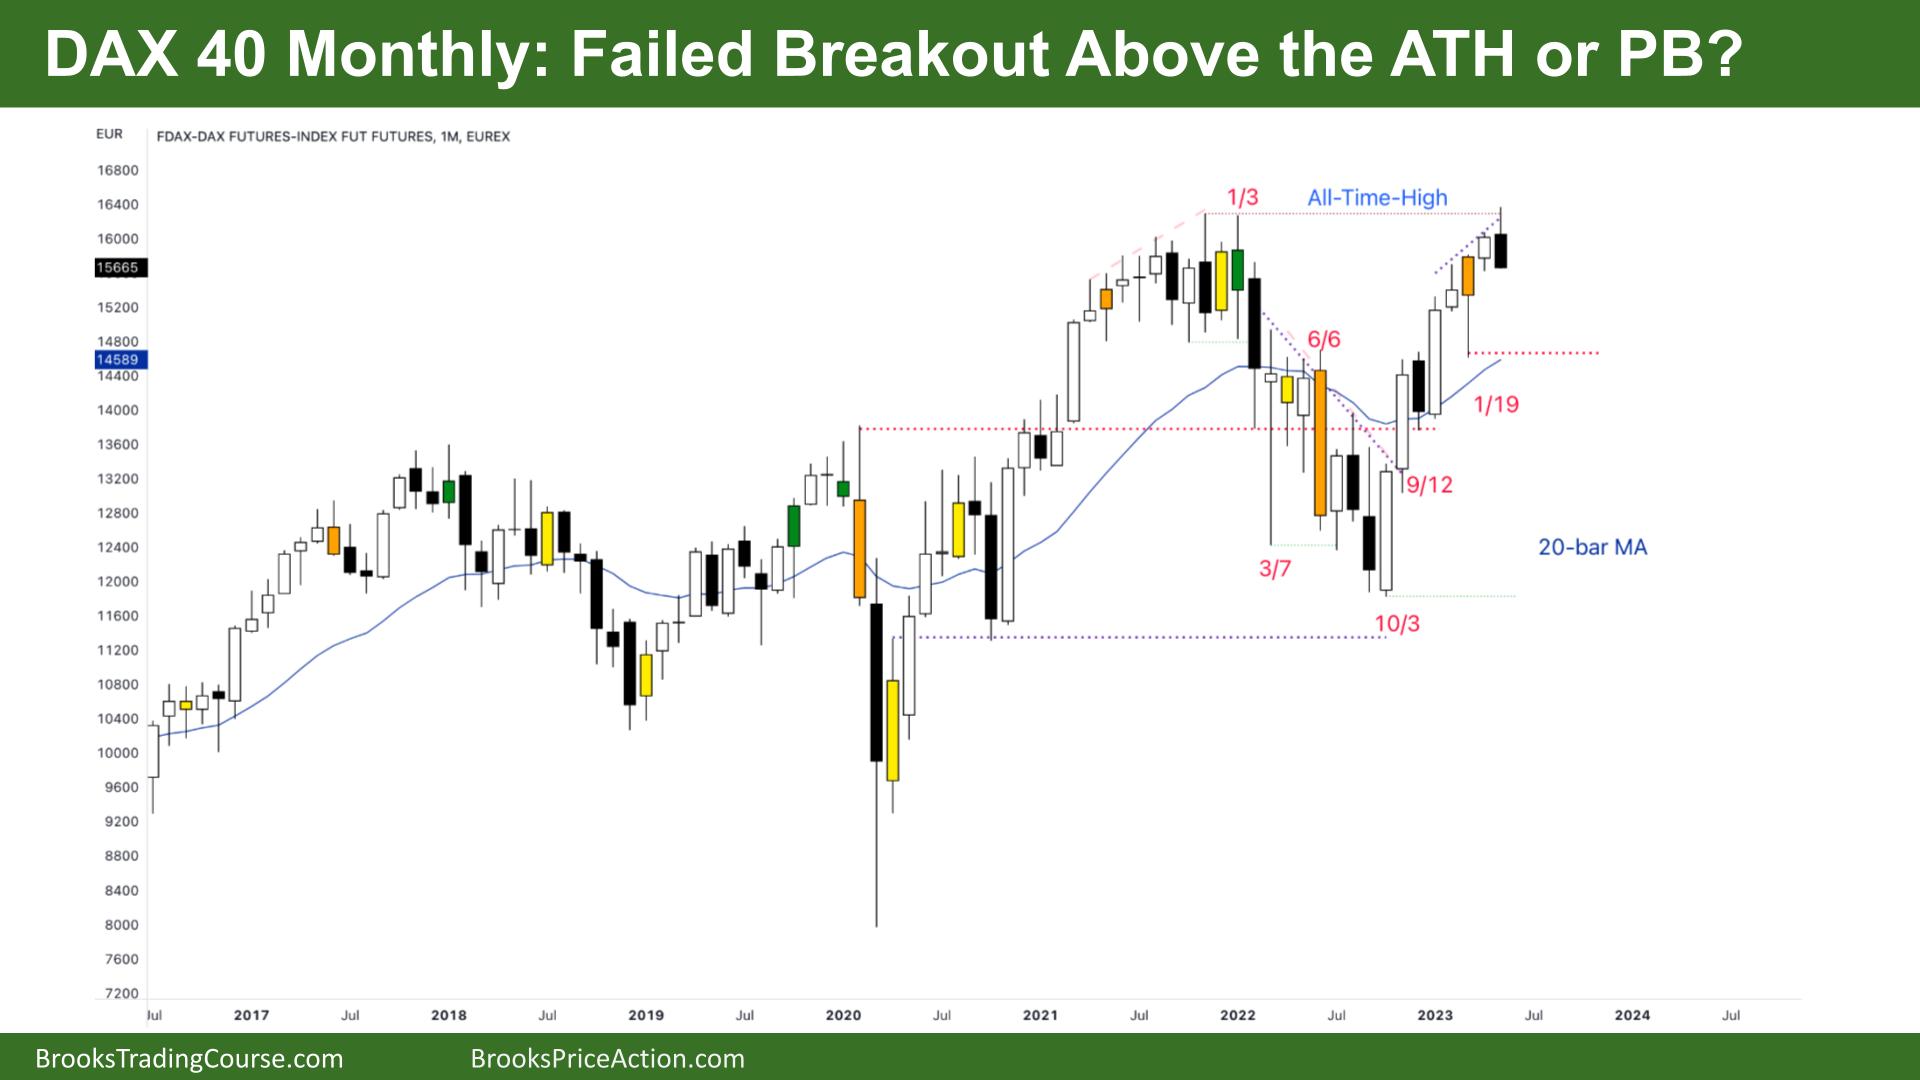 DAX 40 Failed Breakout Above the ATH or PB?